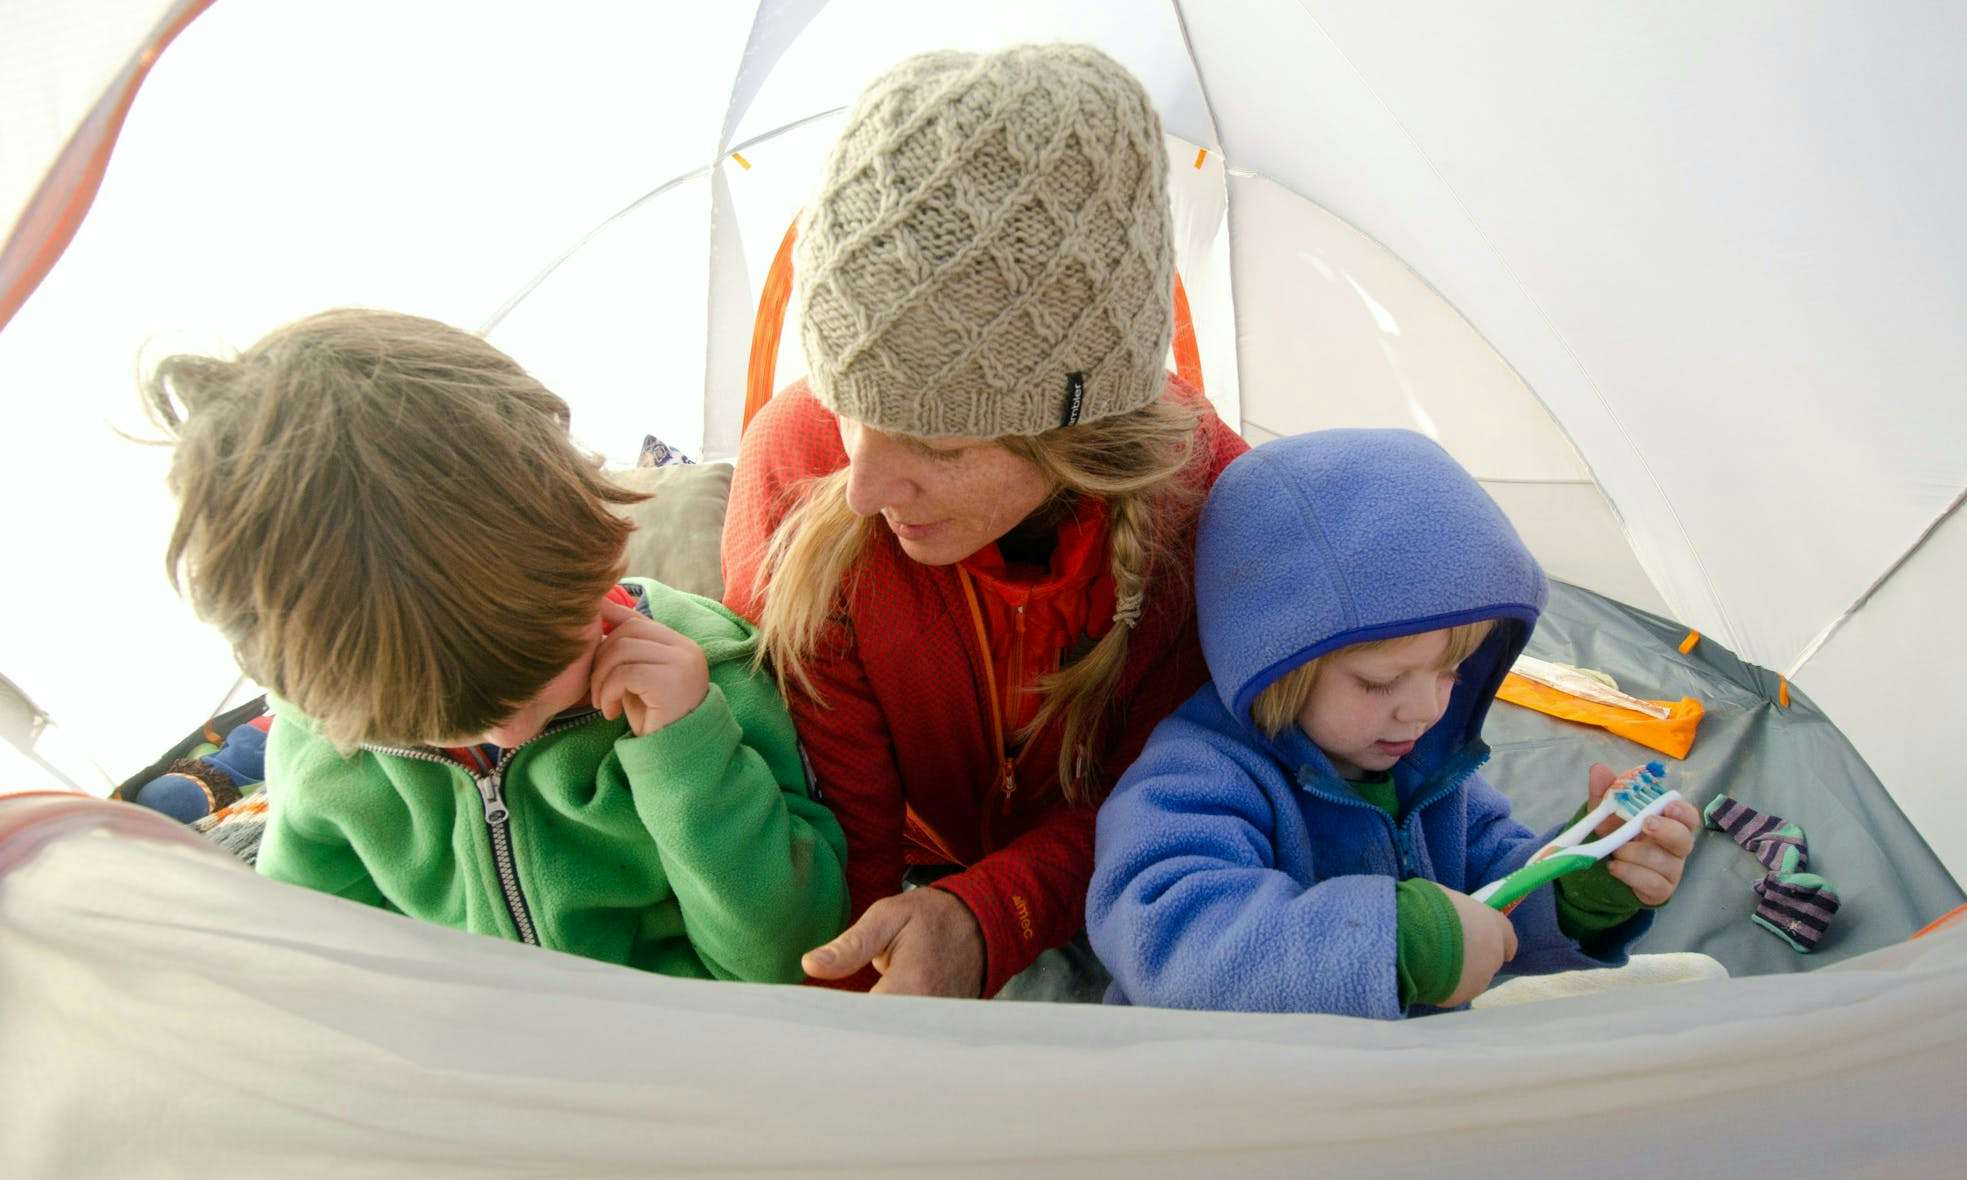 Mom and two young kids in a tent on a camping trip